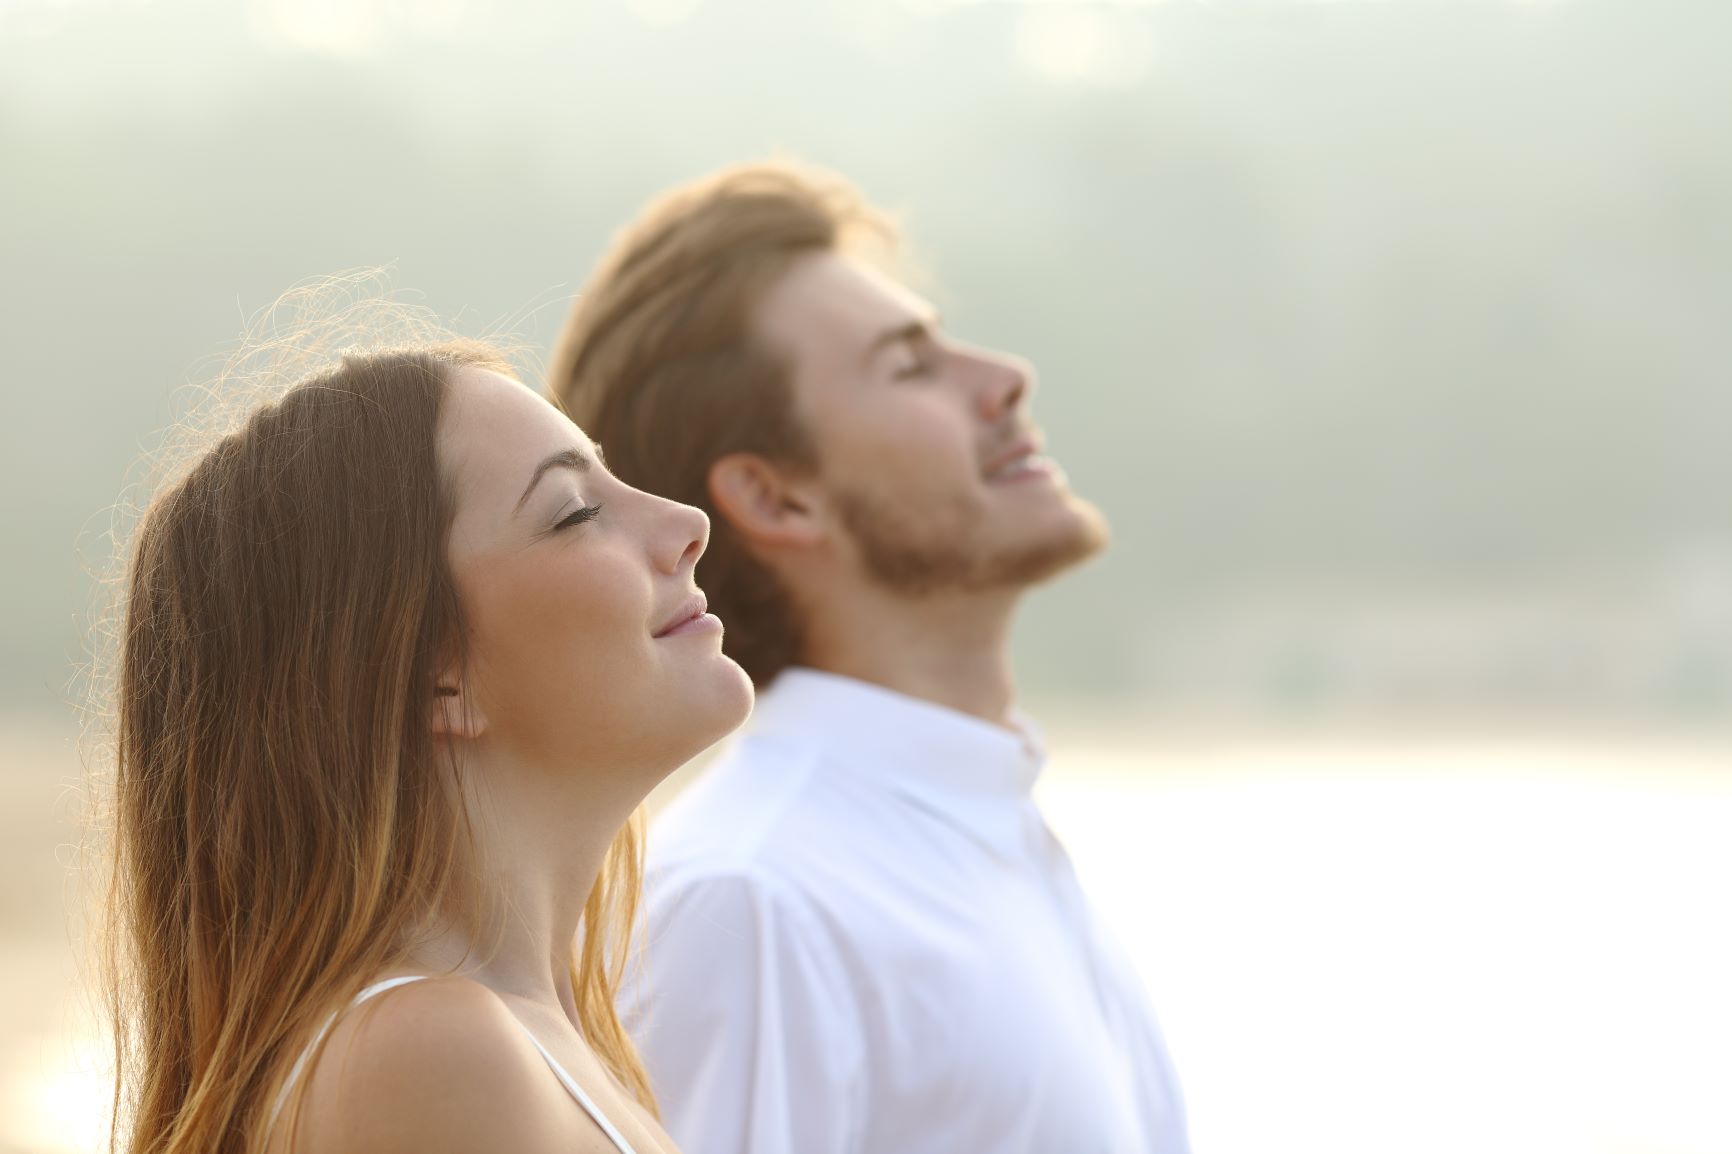  A Man And Woman Taking Deep Breaths